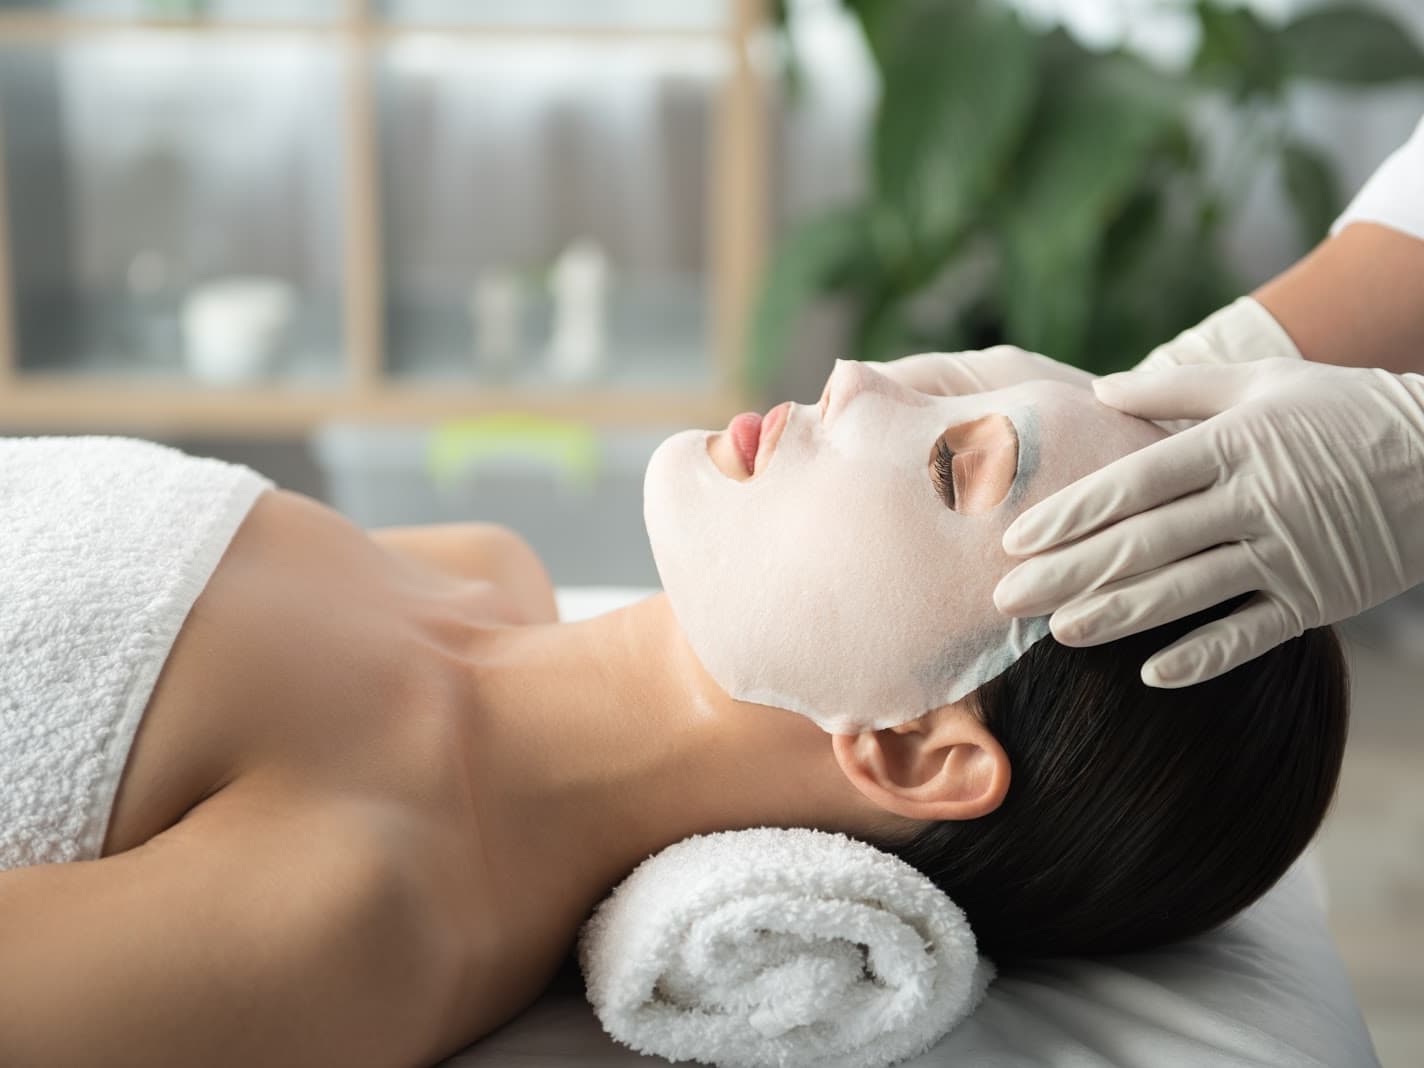 60 Minute Moisturizing Facial at Pink Haven Nail Lounge - Get Deals, Cashback and Rewards with ShopBack GO